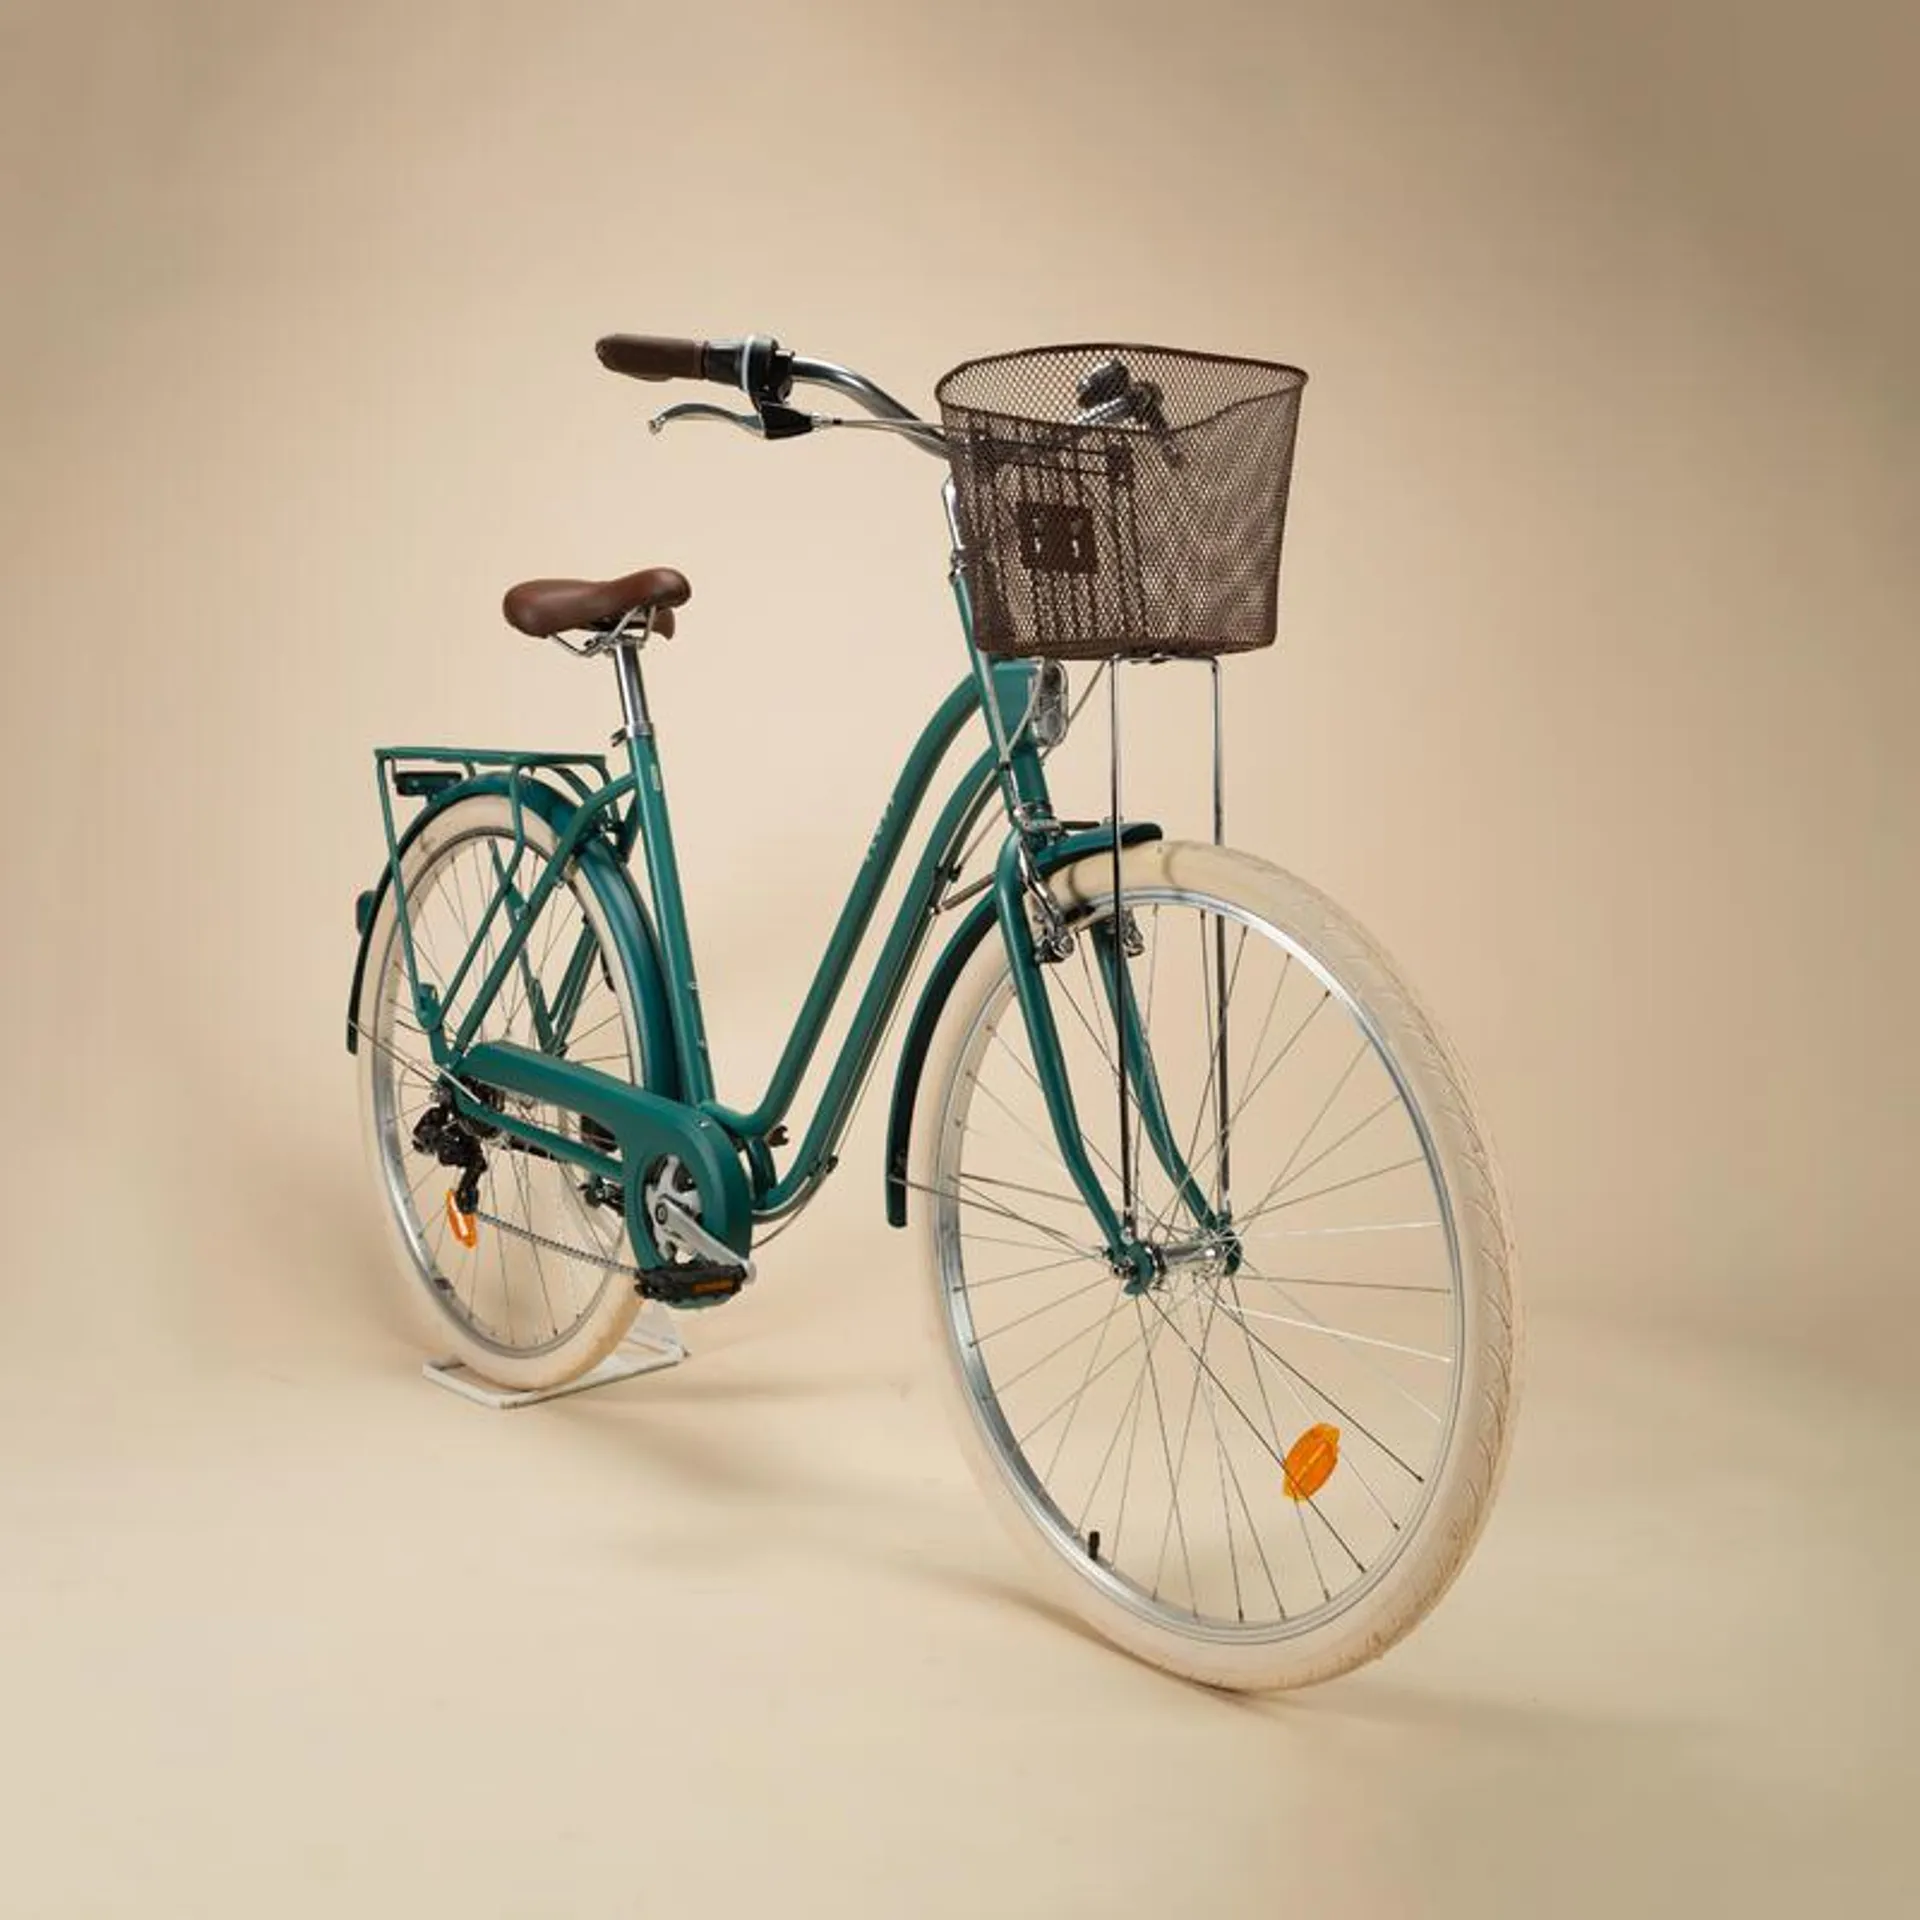 Fully-equipped, 6-speed low frame city bike, green